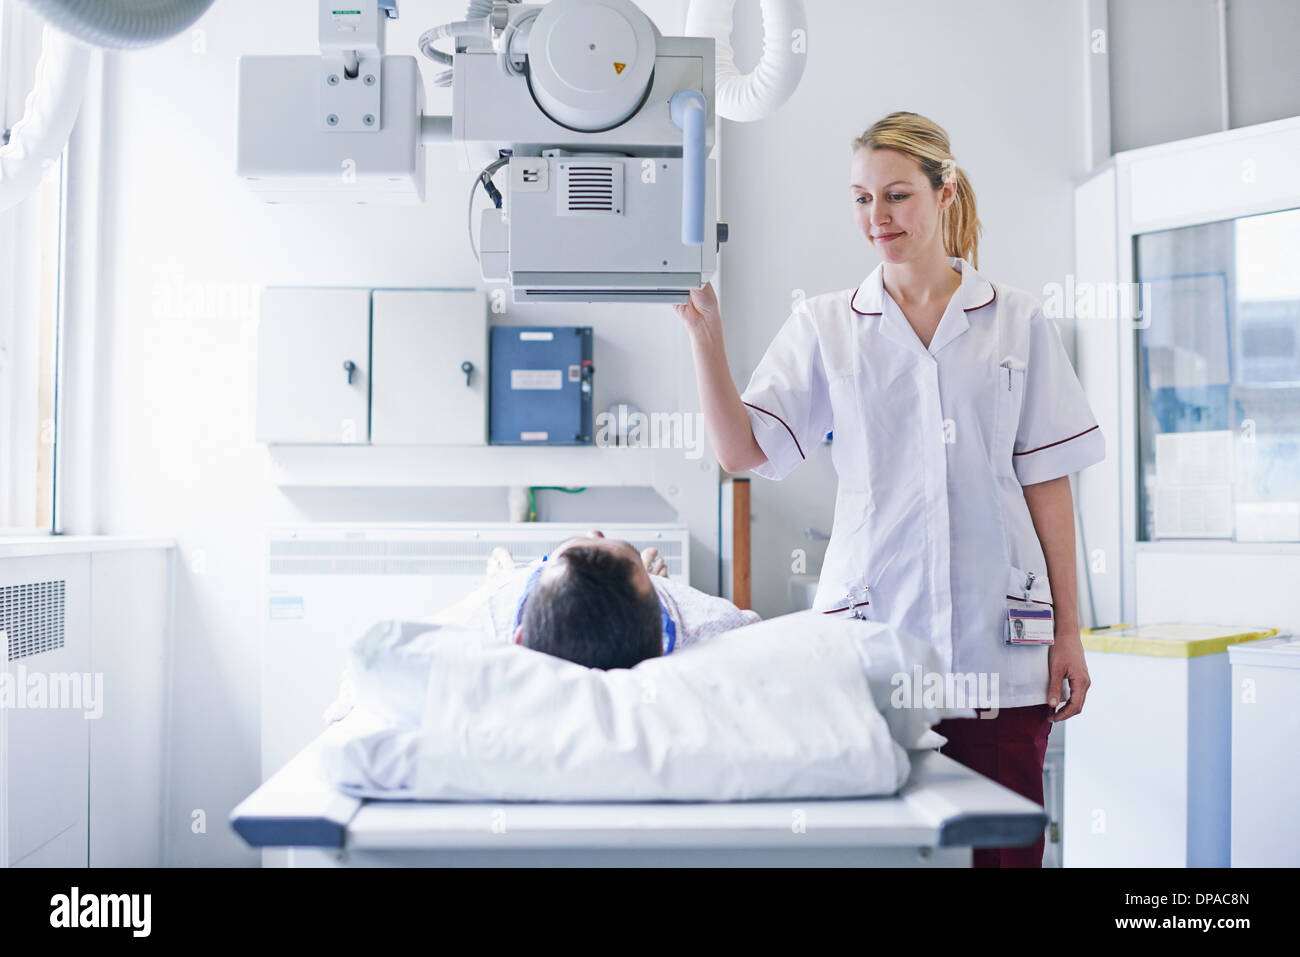 Radiologist scanning patient Stock Photo